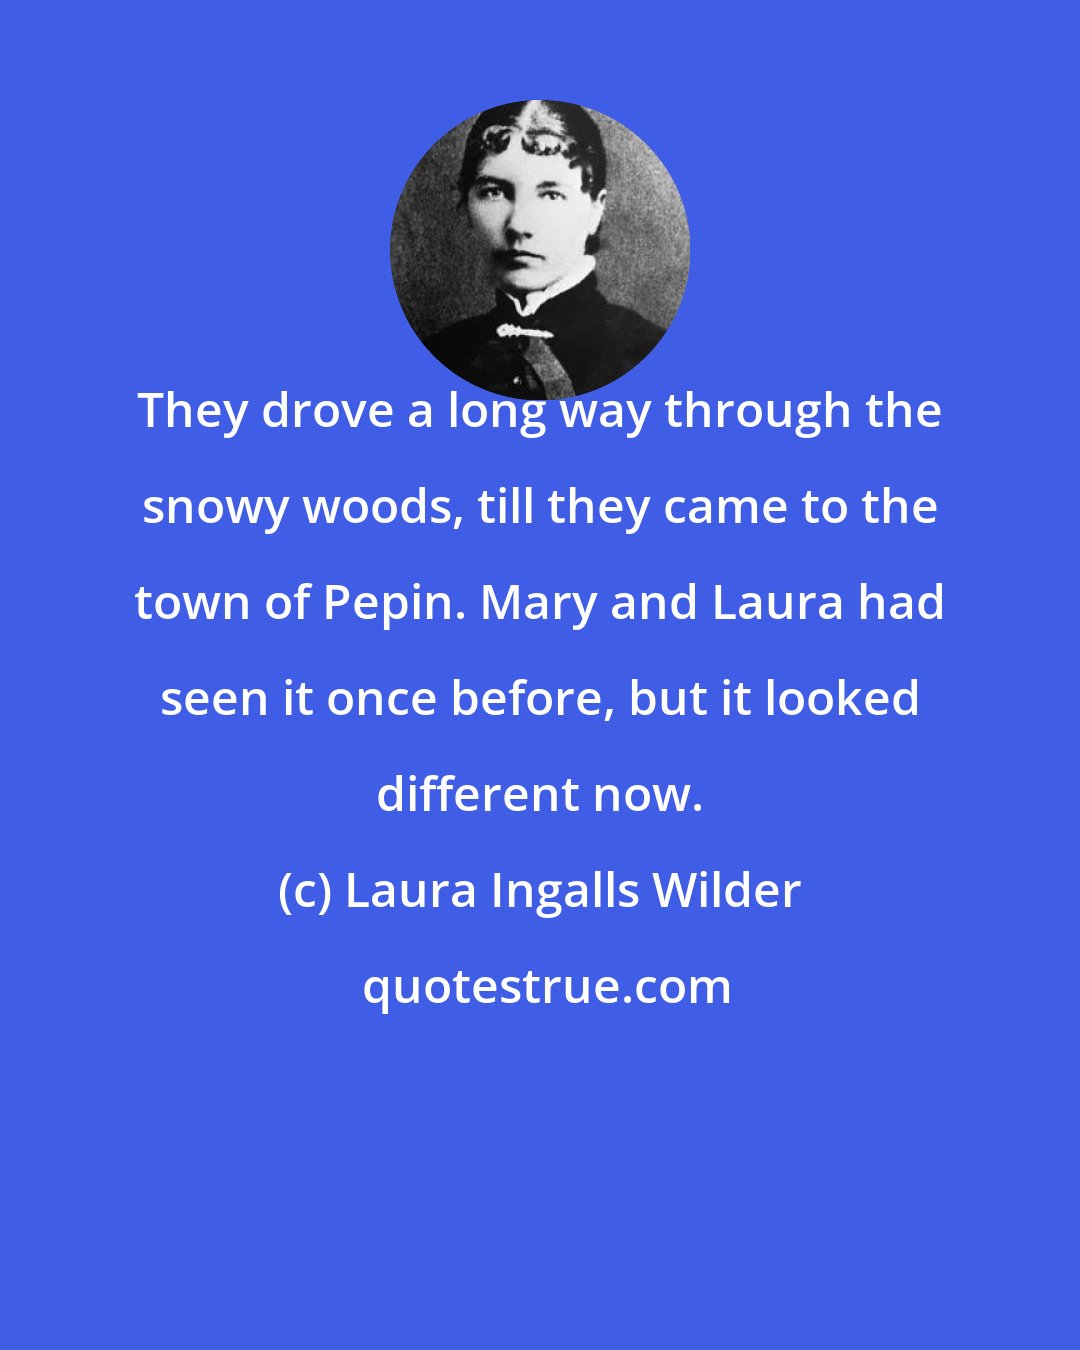 Laura Ingalls Wilder: They drove a long way through the snowy woods, till they came to the town of Pepin. Mary and Laura had seen it once before, but it looked different now.